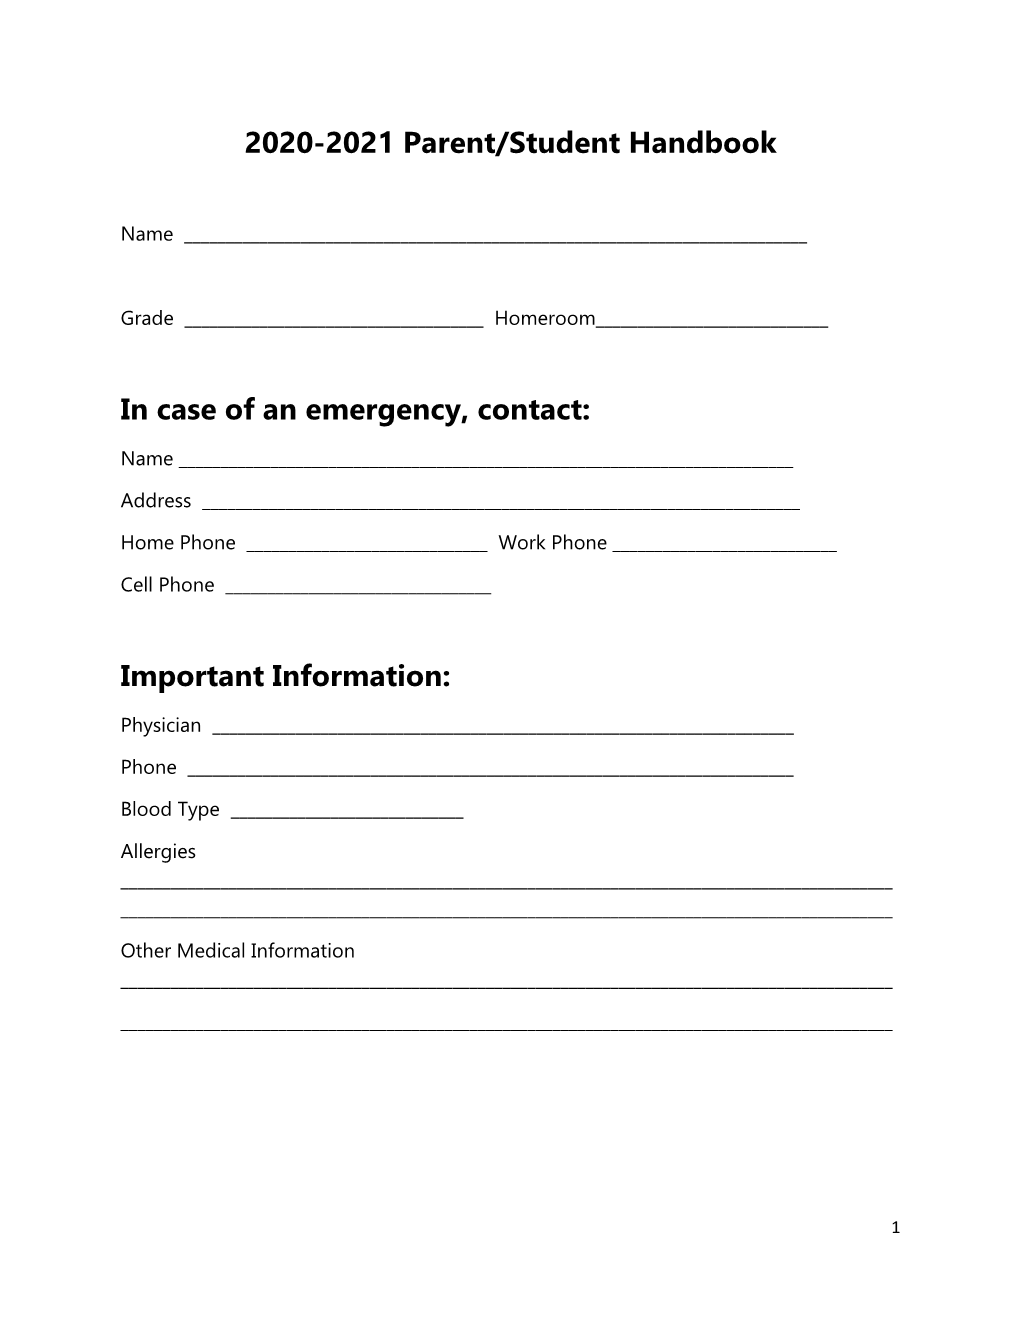 2020-2021 Parent/Student Handbook in Case of an Emergency, Contact